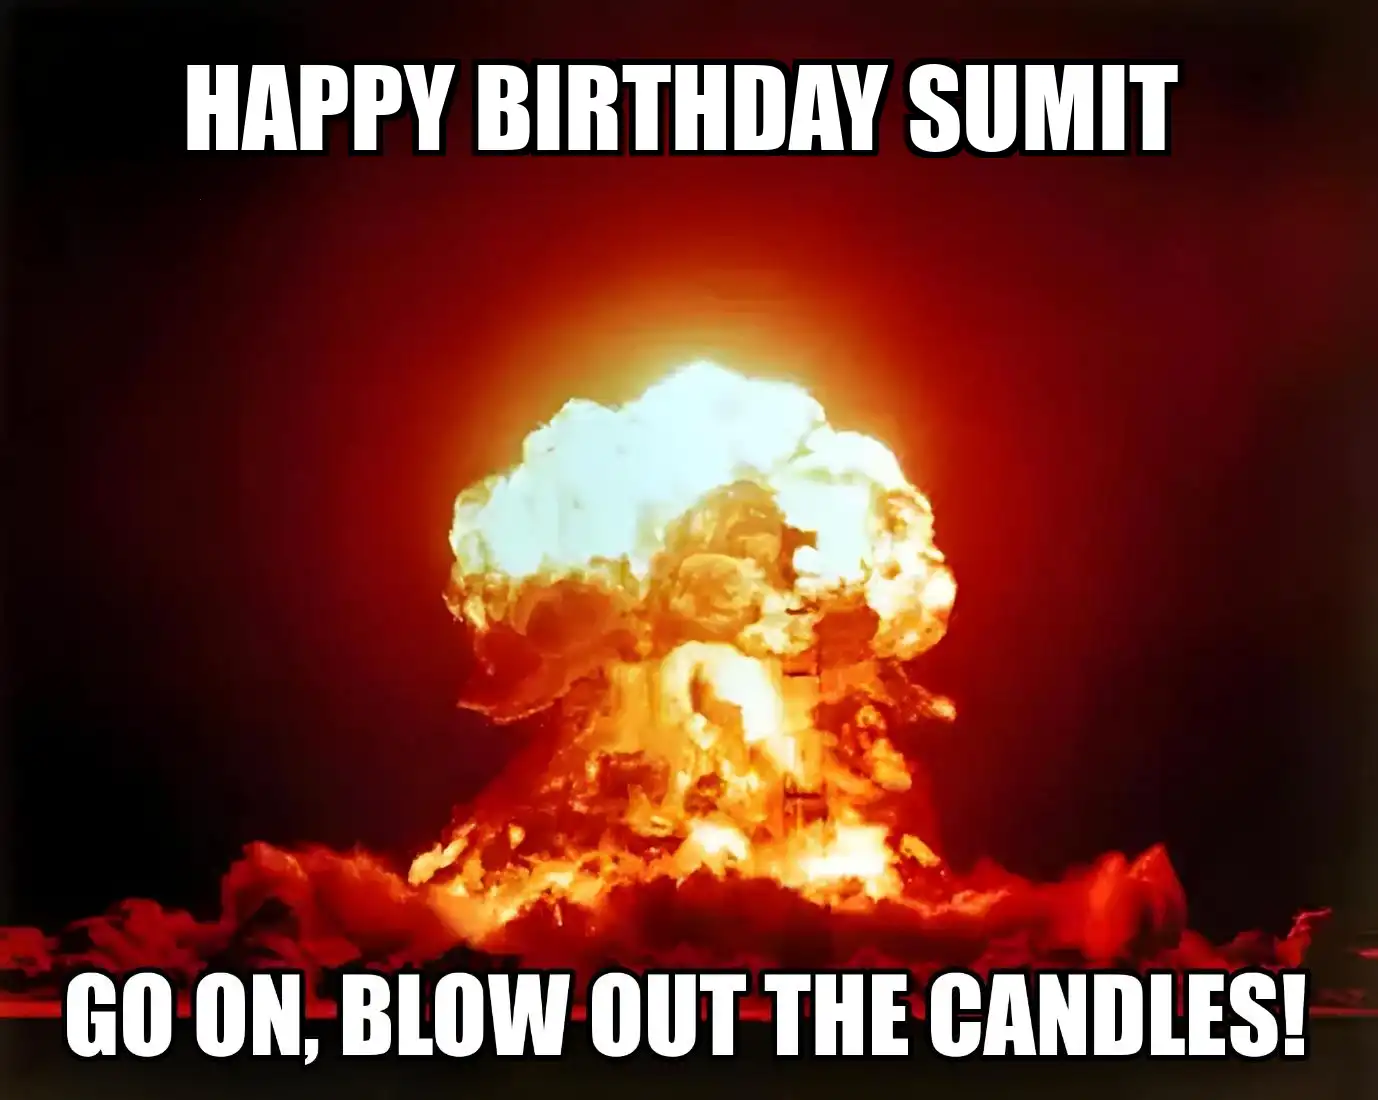 Happy Birthday Sumit Go On Blow Out The Candles Meme